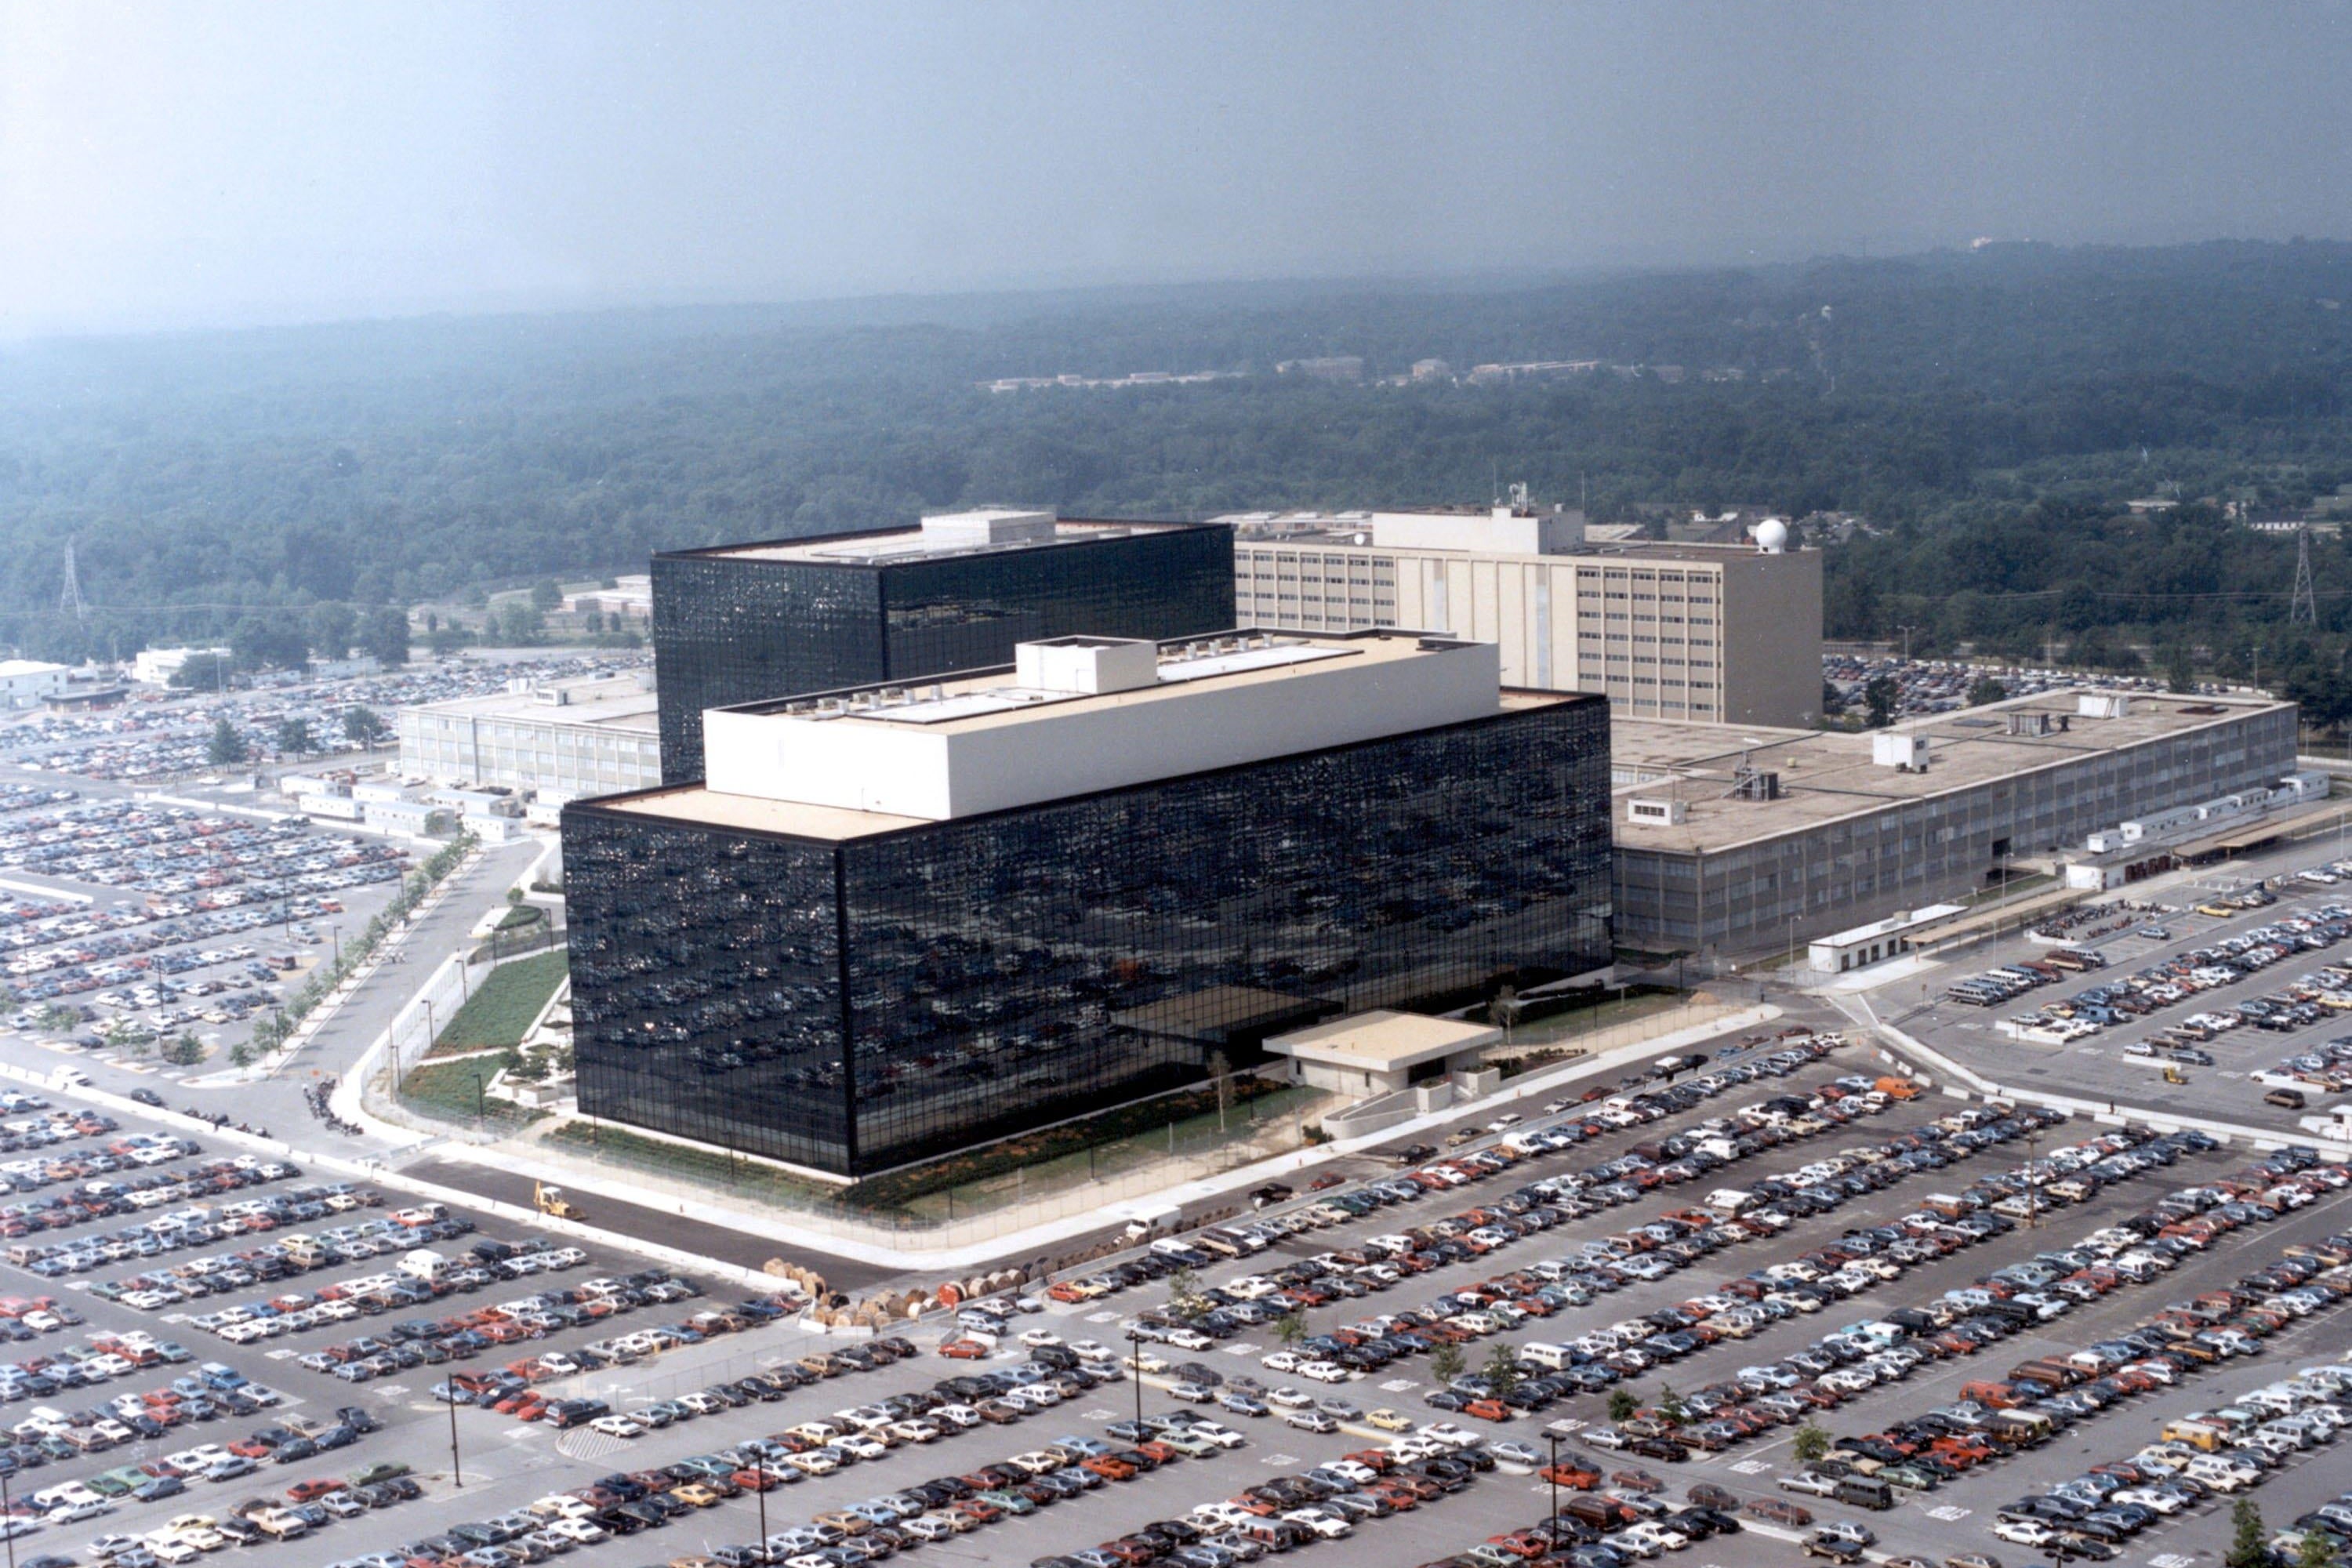 The National Security Agency building.